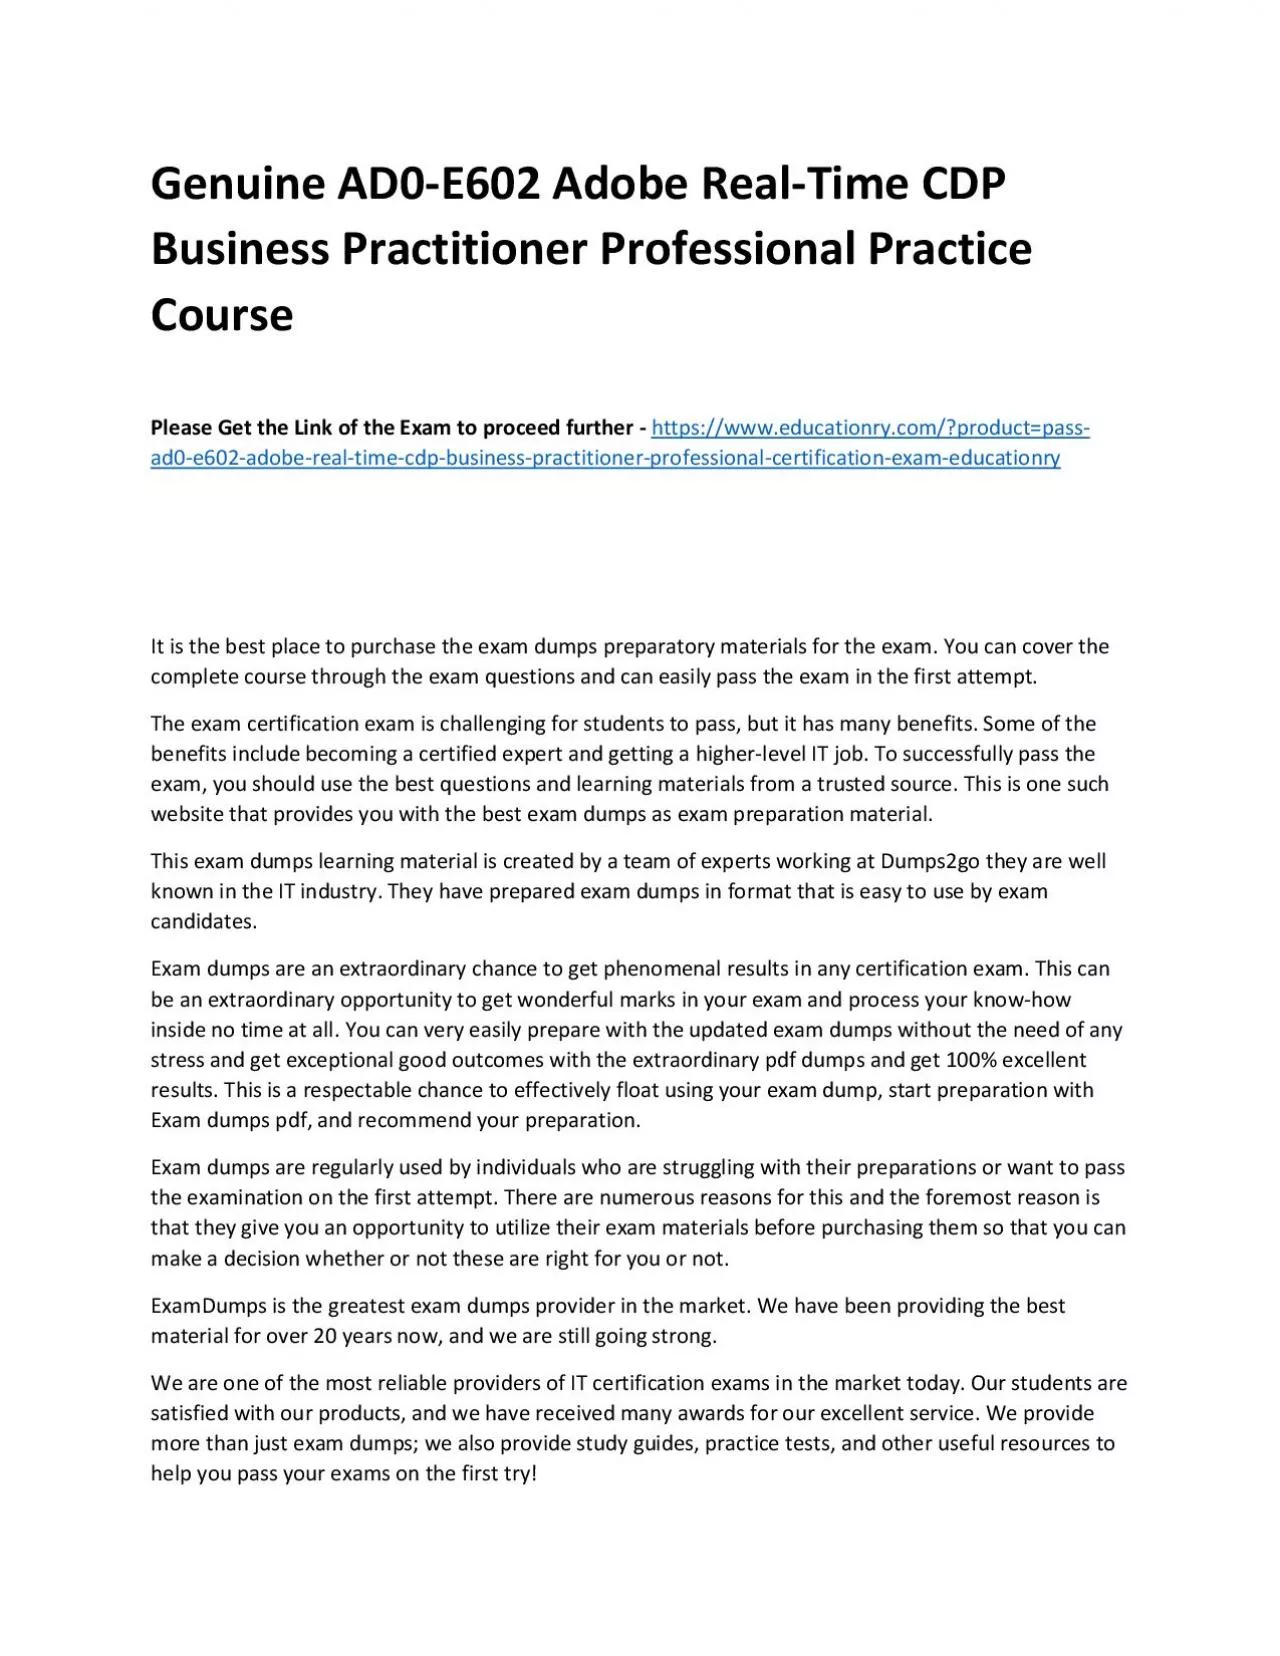 Genuine AD0-E602 Adobe Real-Time CDP Business Practitioner Professional Practice Course